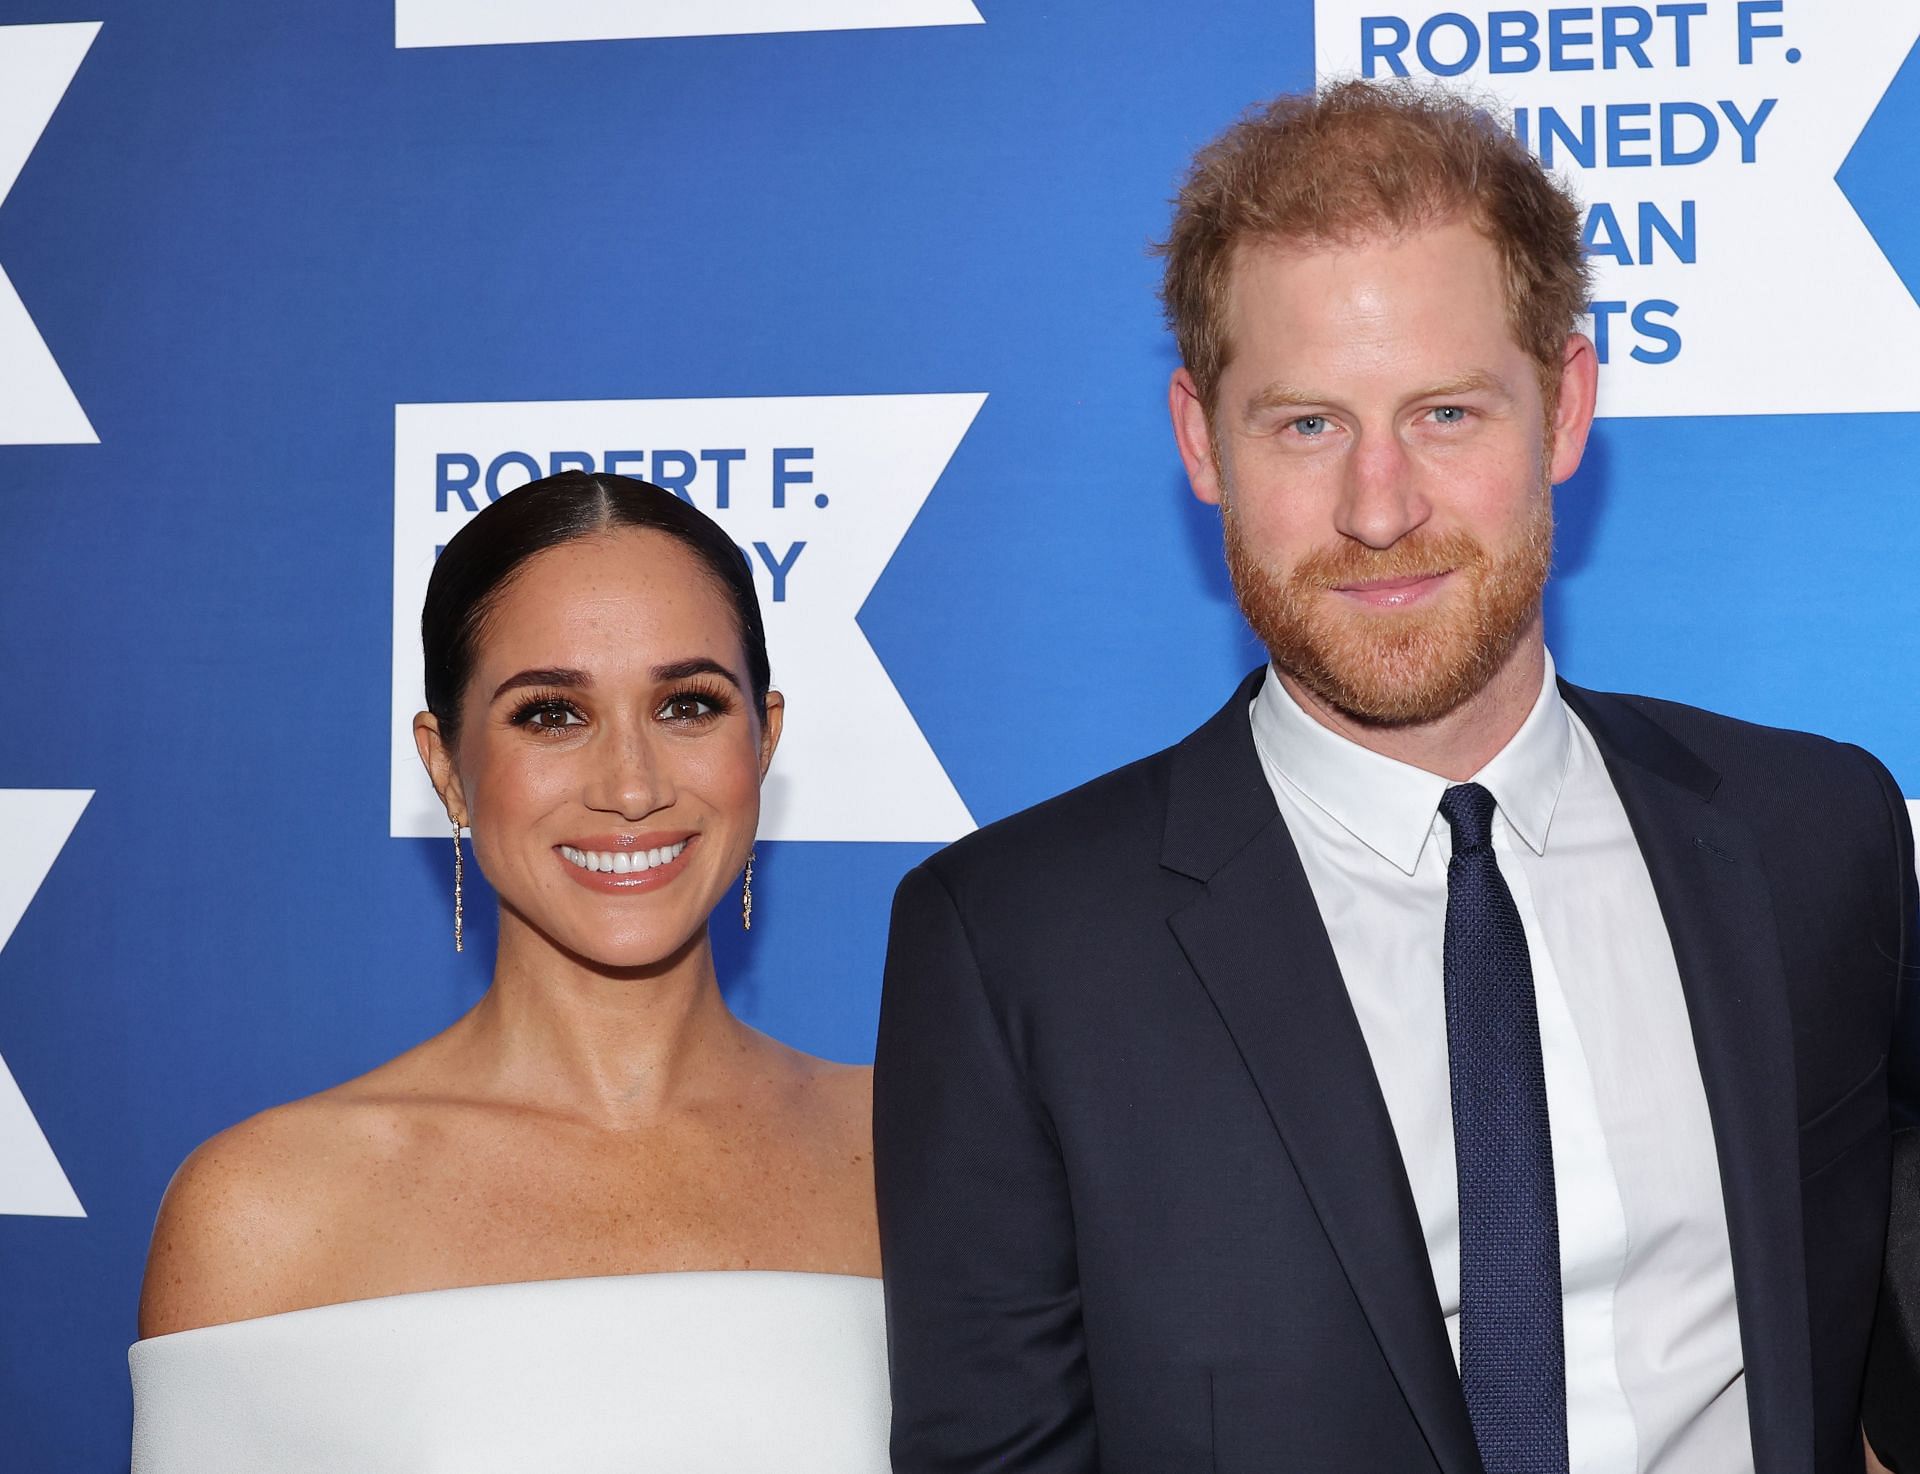 Prince Harry and Meghan Markle for the 2022 Robert F. Kennedy Human Rights Ripple of Hope Gala (Image via Getty Images/Mike Coppola)